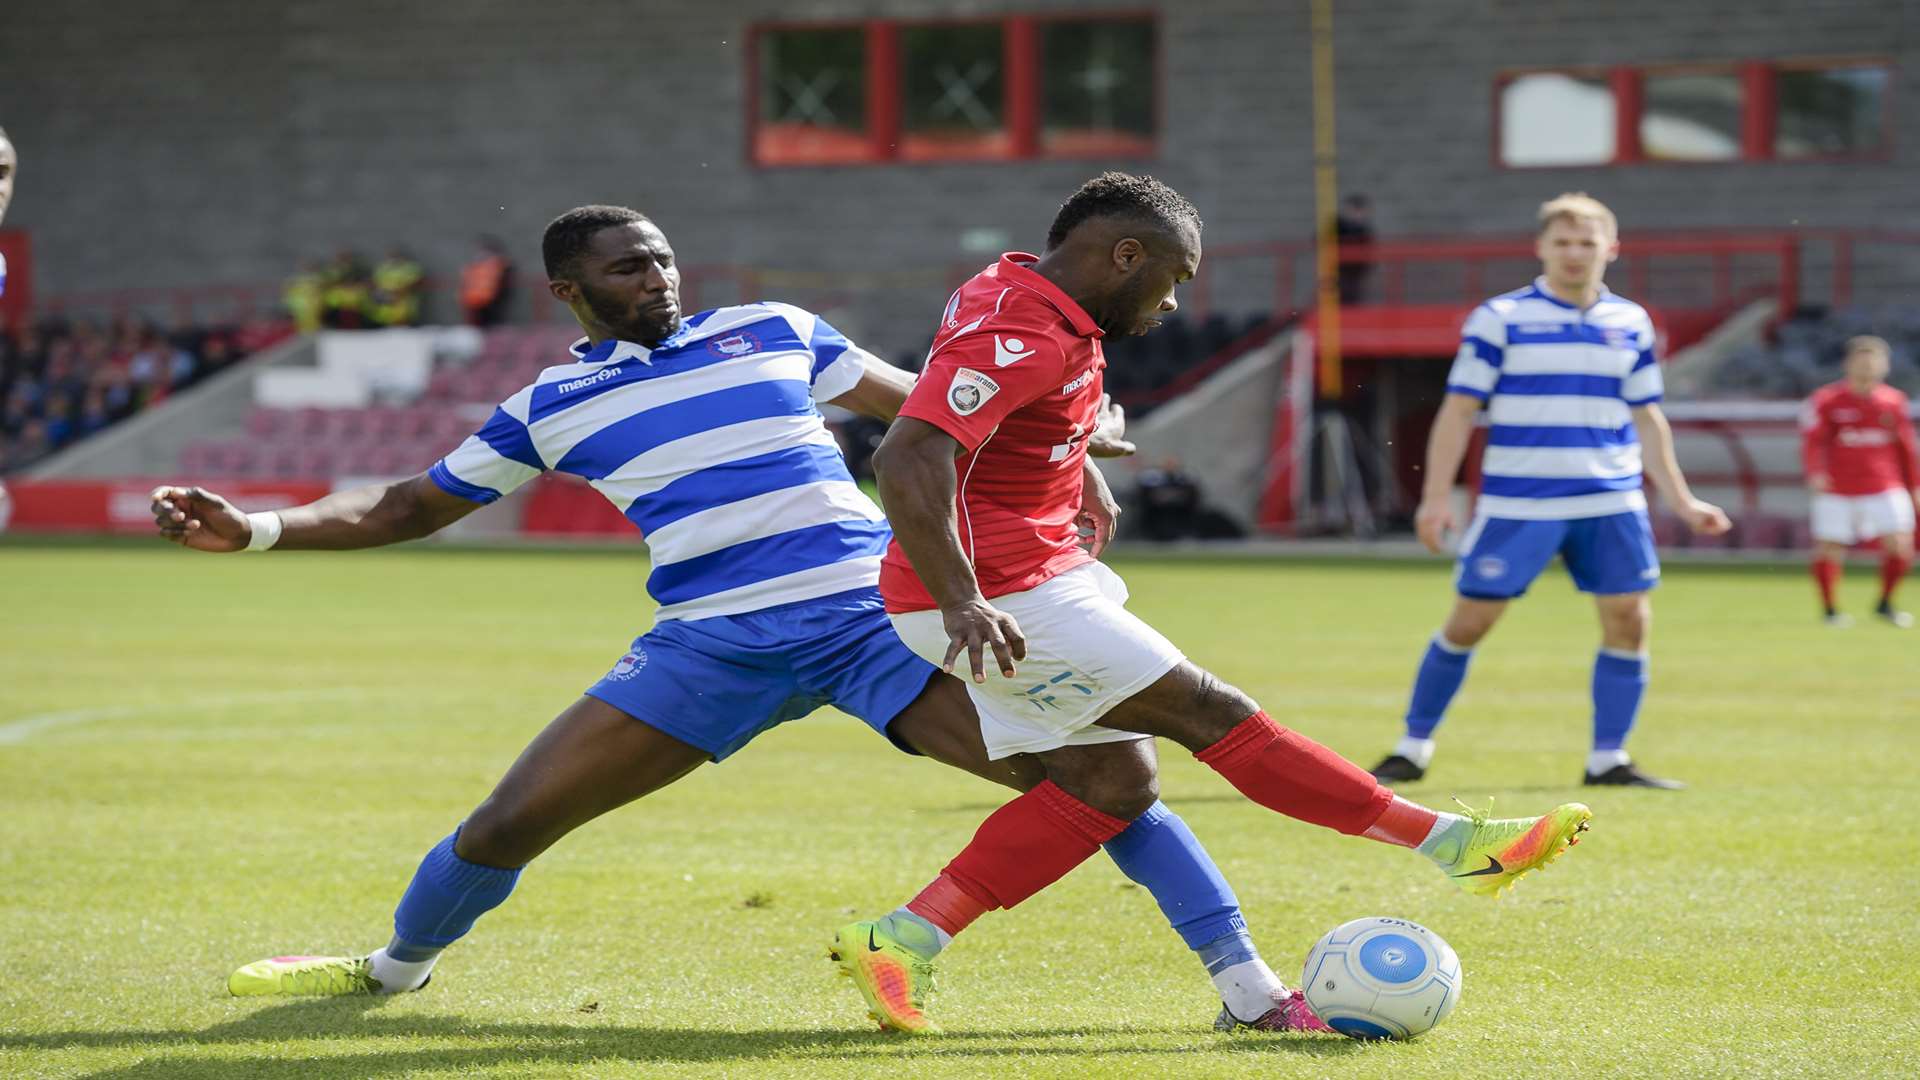 Aaron McLean on the ball for Ebbsfleet against Oxford City Picture: Andy Payton